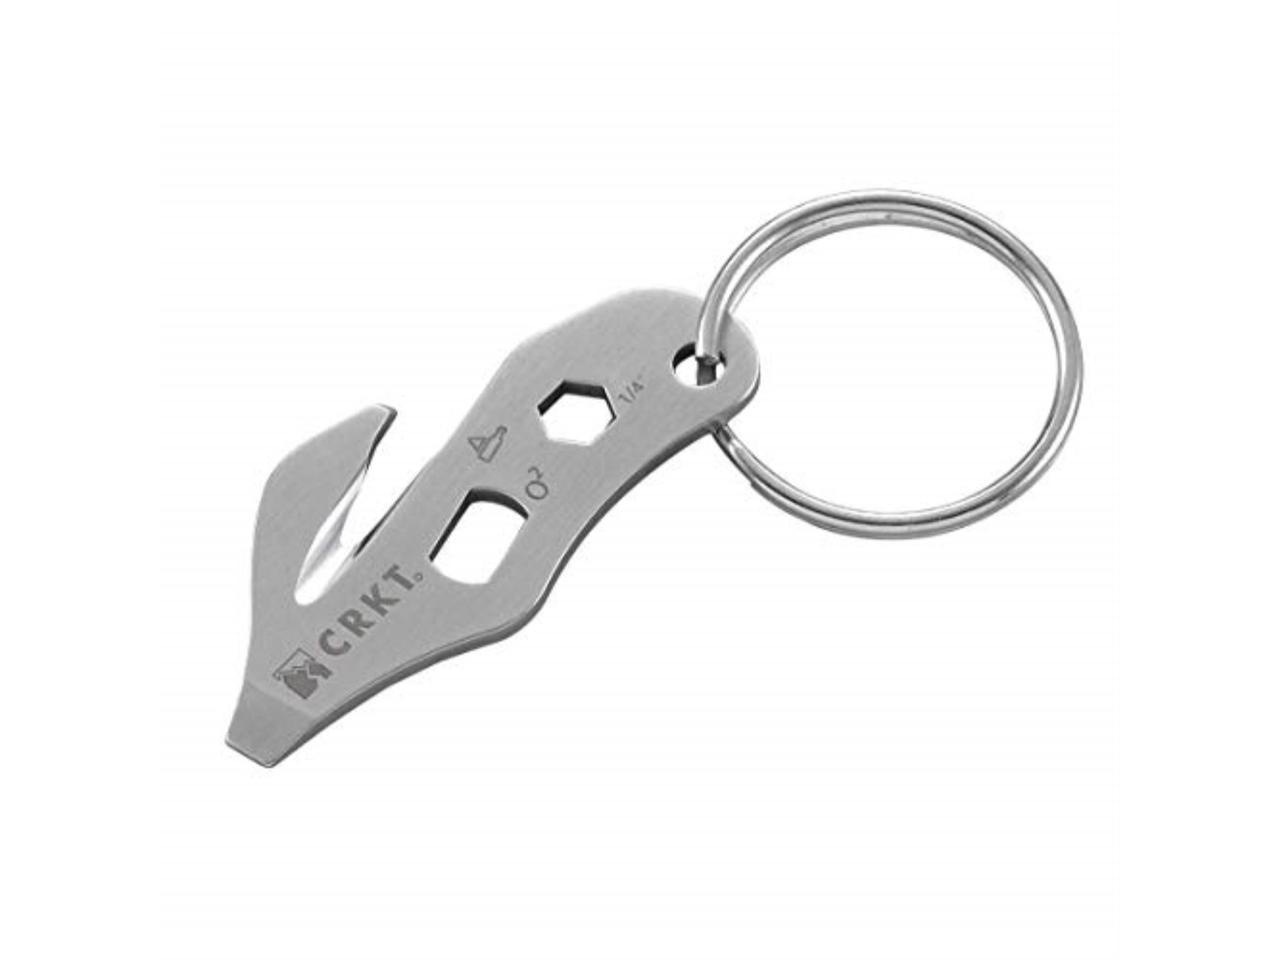 EDC Keyring Micro Tool Lightweight Multi-Tool for Everyday Carry, CRKT K.E.R.T